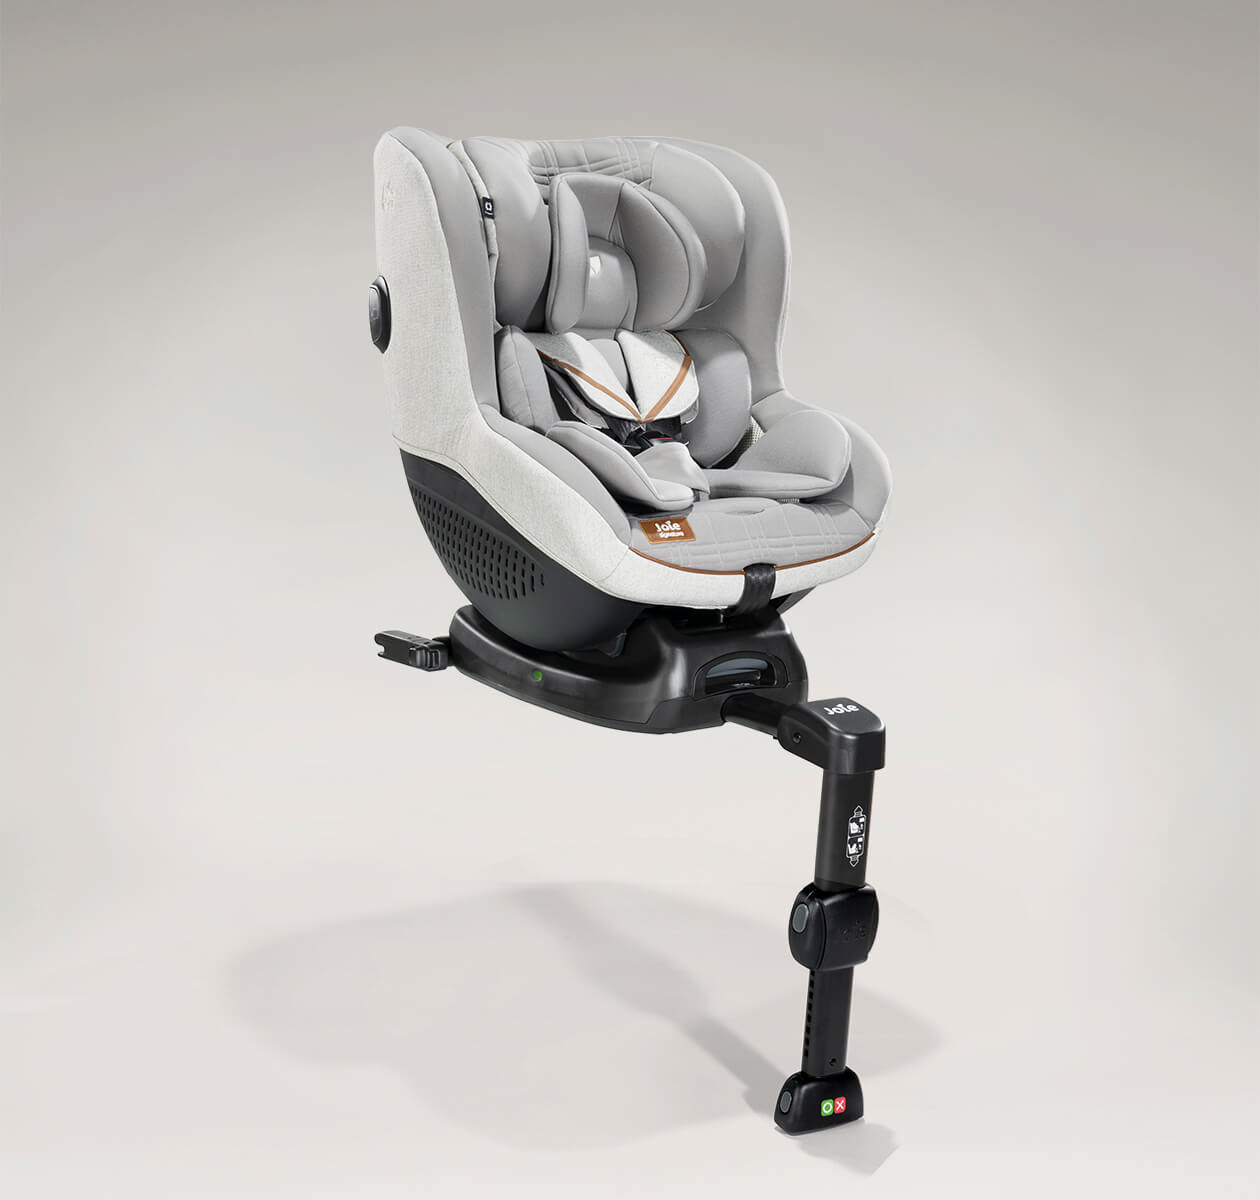  A gray Joie I-Quest toddler car seat on an ISOFIX base, facing at an angle to the right.